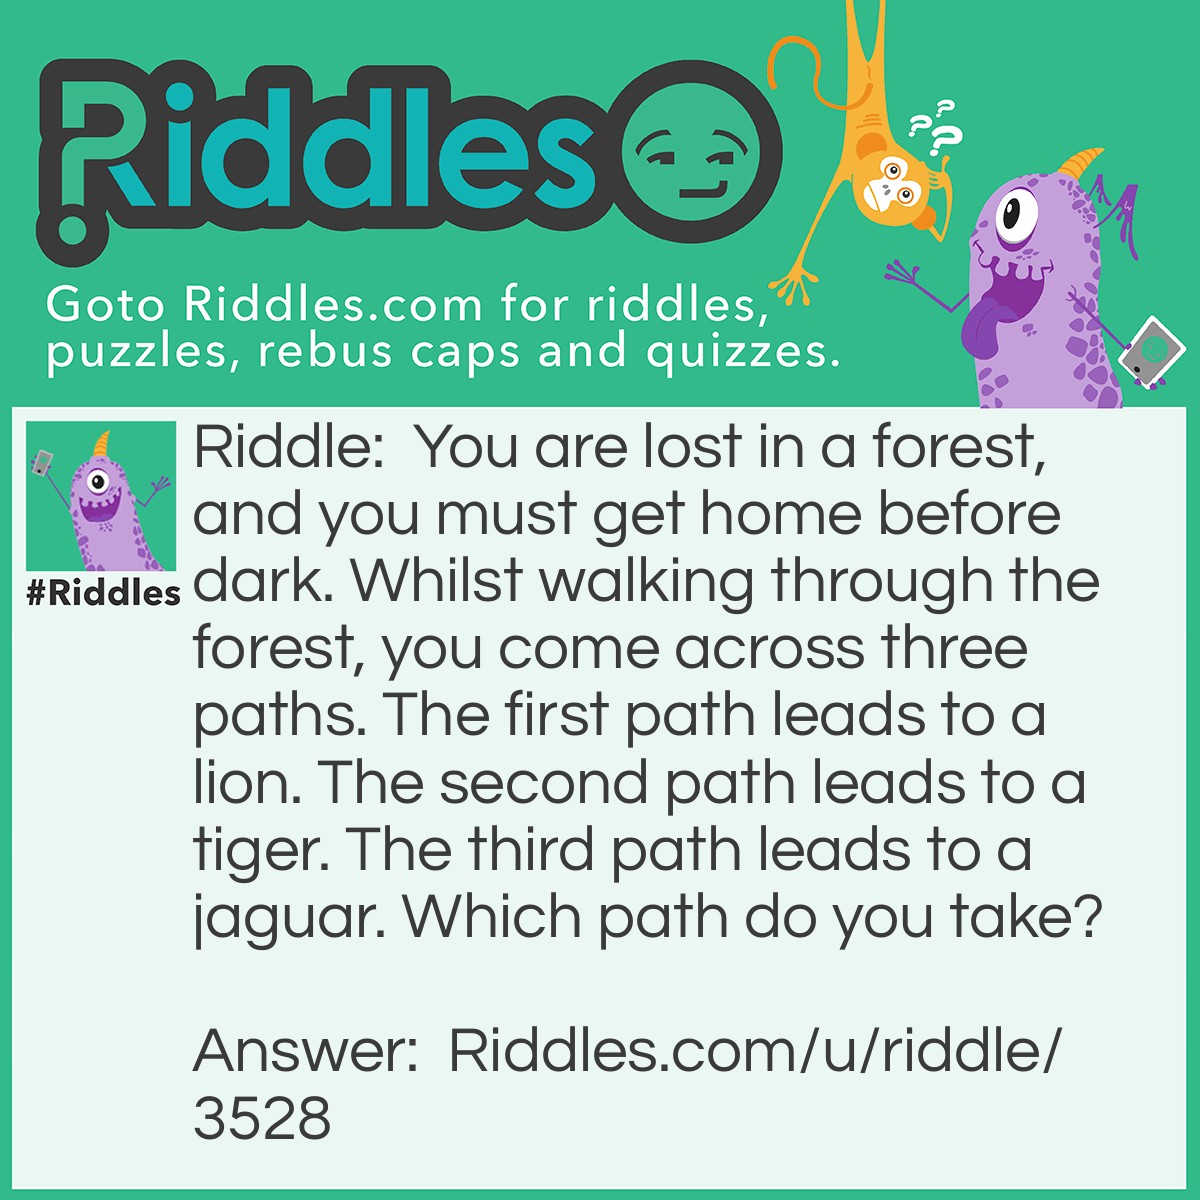 Riddle: You are lost in a forest, and you must get home before dark. Whilst walking through the forest, you come across three paths. The first path leads to a lion. The second path leads to a tiger. The third path leads to a jaguar. Which path do you take? Answer: Take the Jaguar, because it's a car.